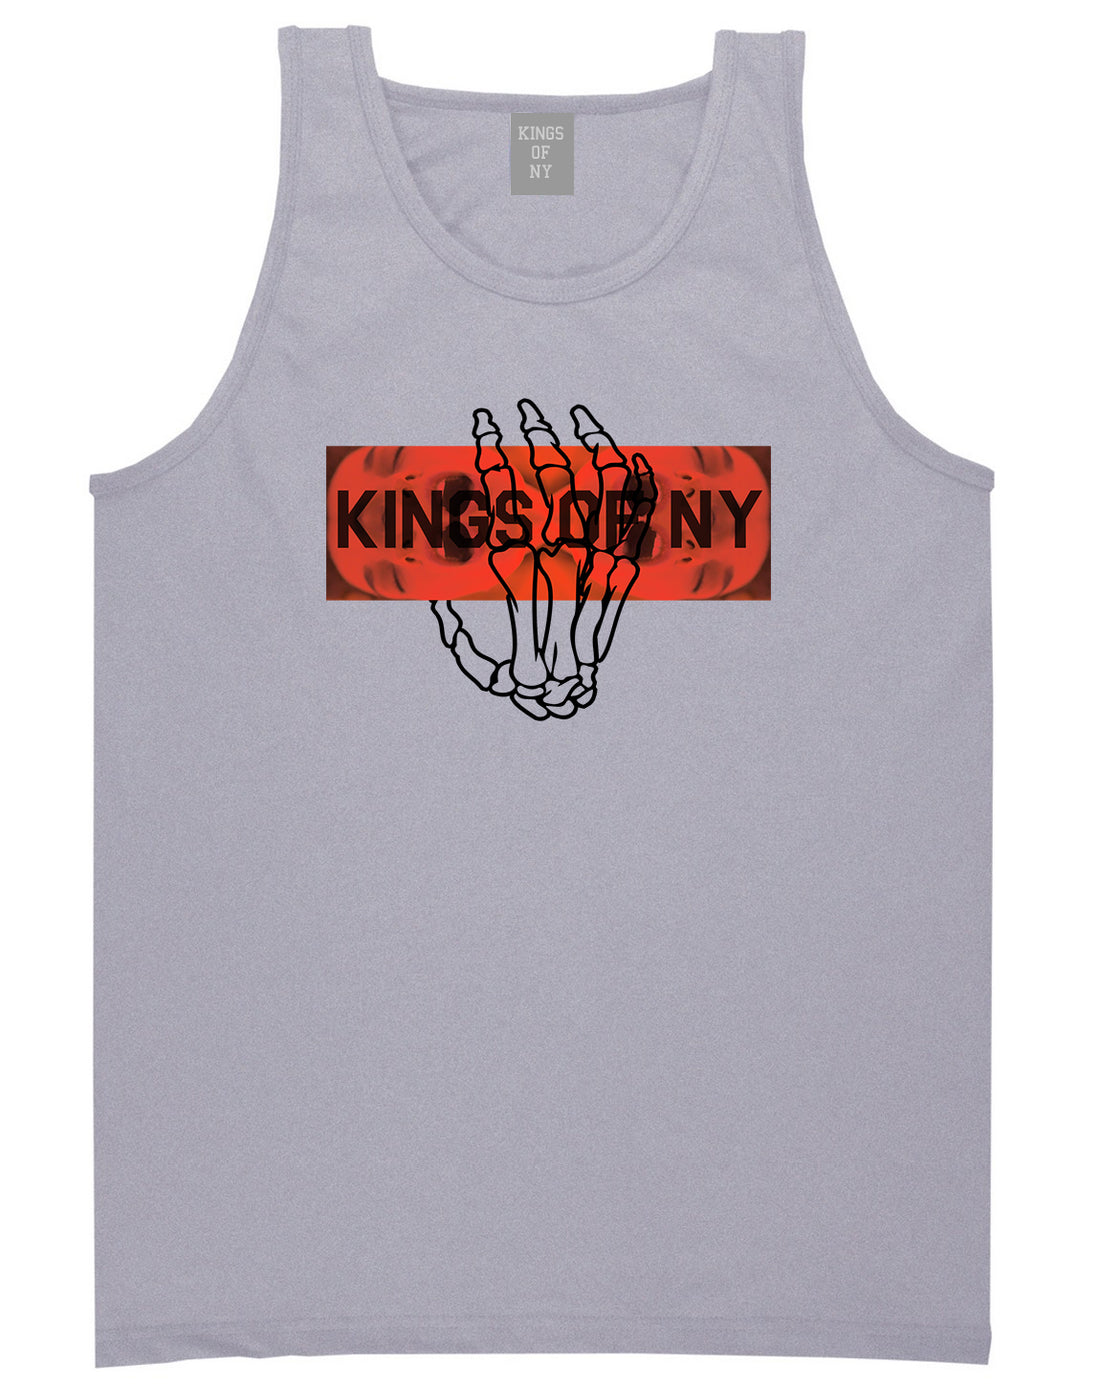 Dead Inside Skeleton Hand Mens Tank Top Shirt Grey by Kings Of NY